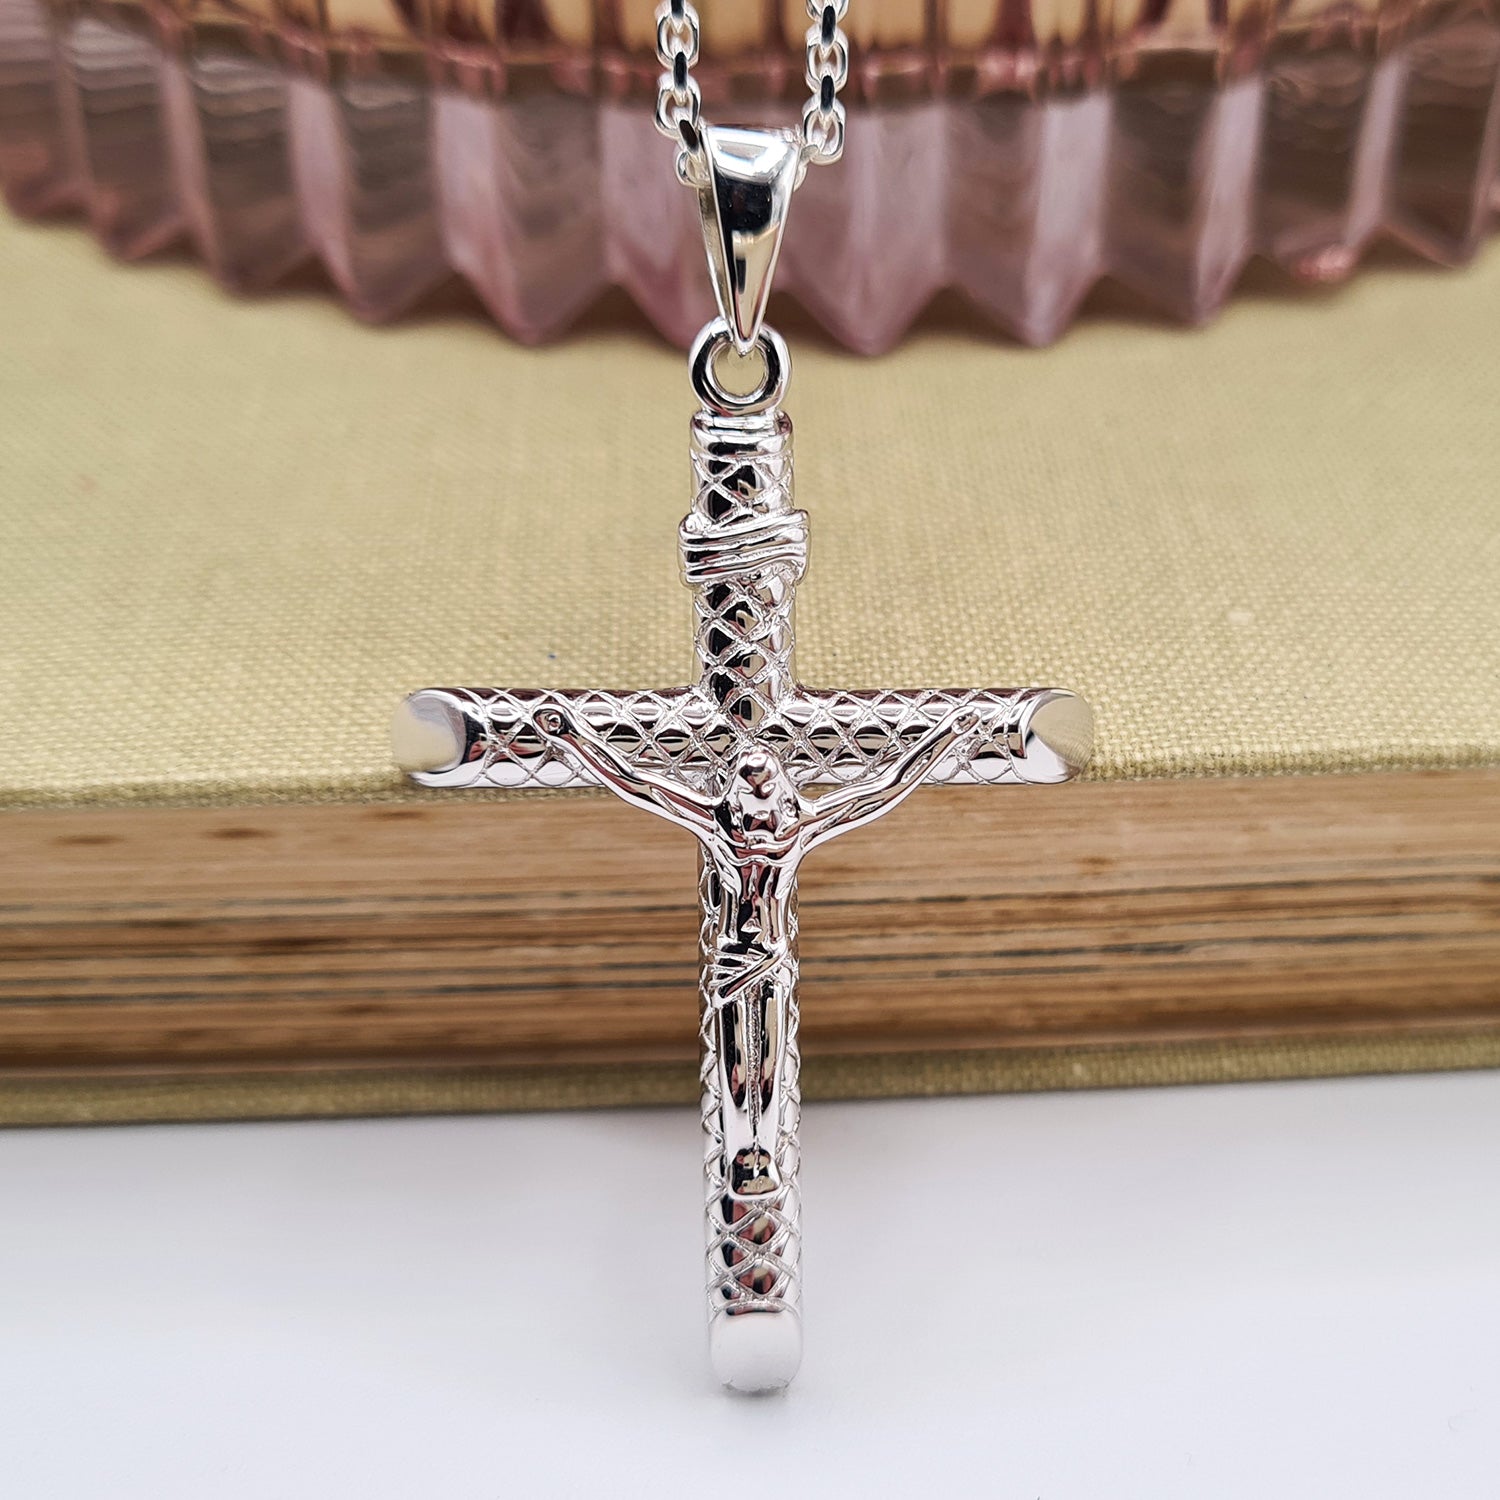 Mens Silver cross necklace,black or silver cross,leather,any length,hand  made | eBay